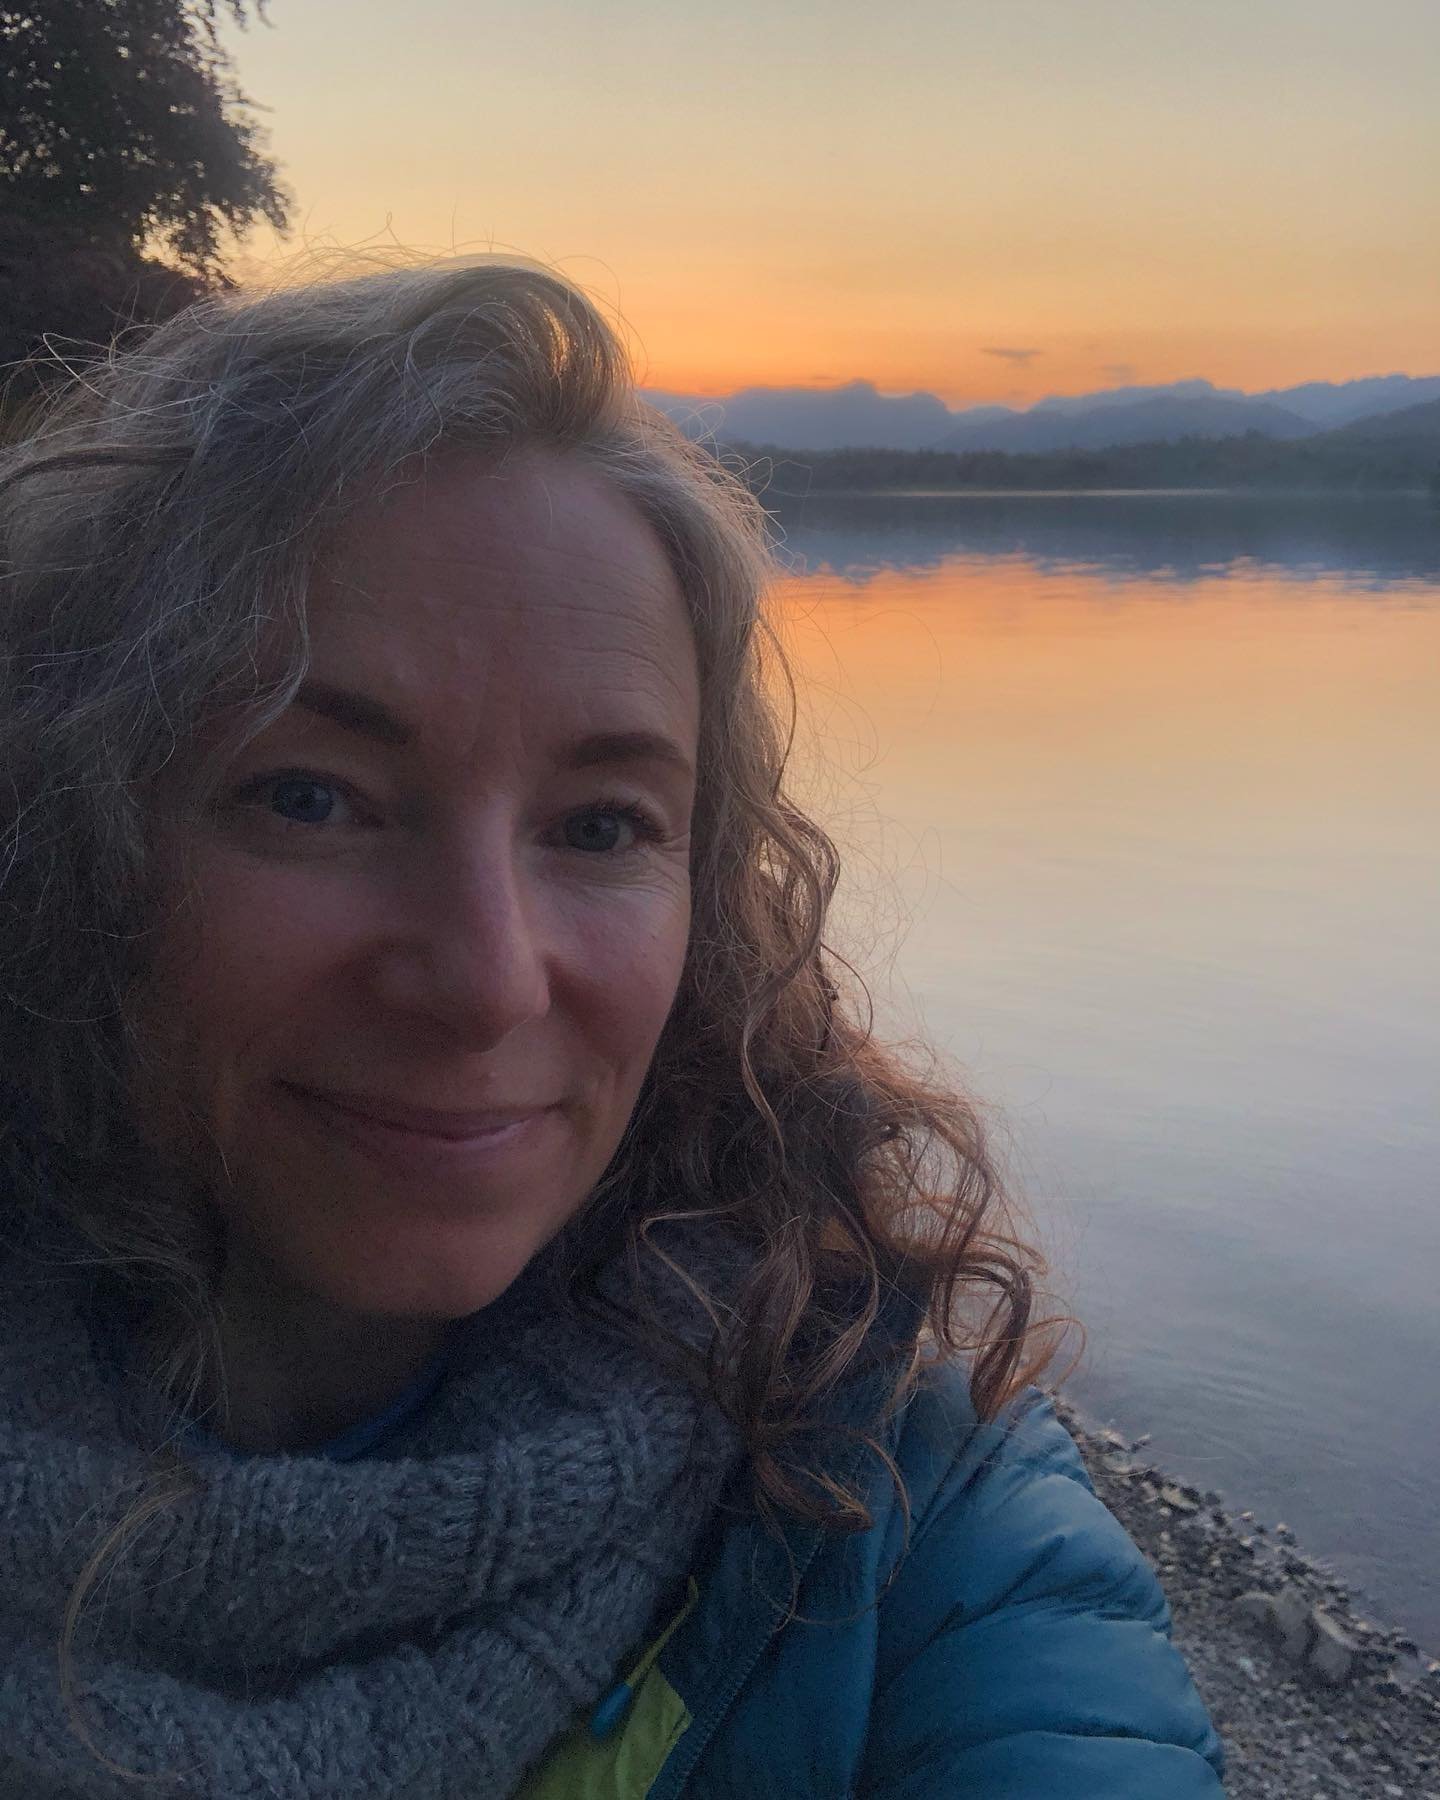 🎉This is 49🎉

A whole weekend of food friends and nature gorgeousness - I like to s t r e t c h it out!! 

✨Evening dip in Windermere then sundowners at @langdalechase 
✨Afternoon tea at @themidlandhotelmorecambe absolutely lush
✨Took teens to @fay